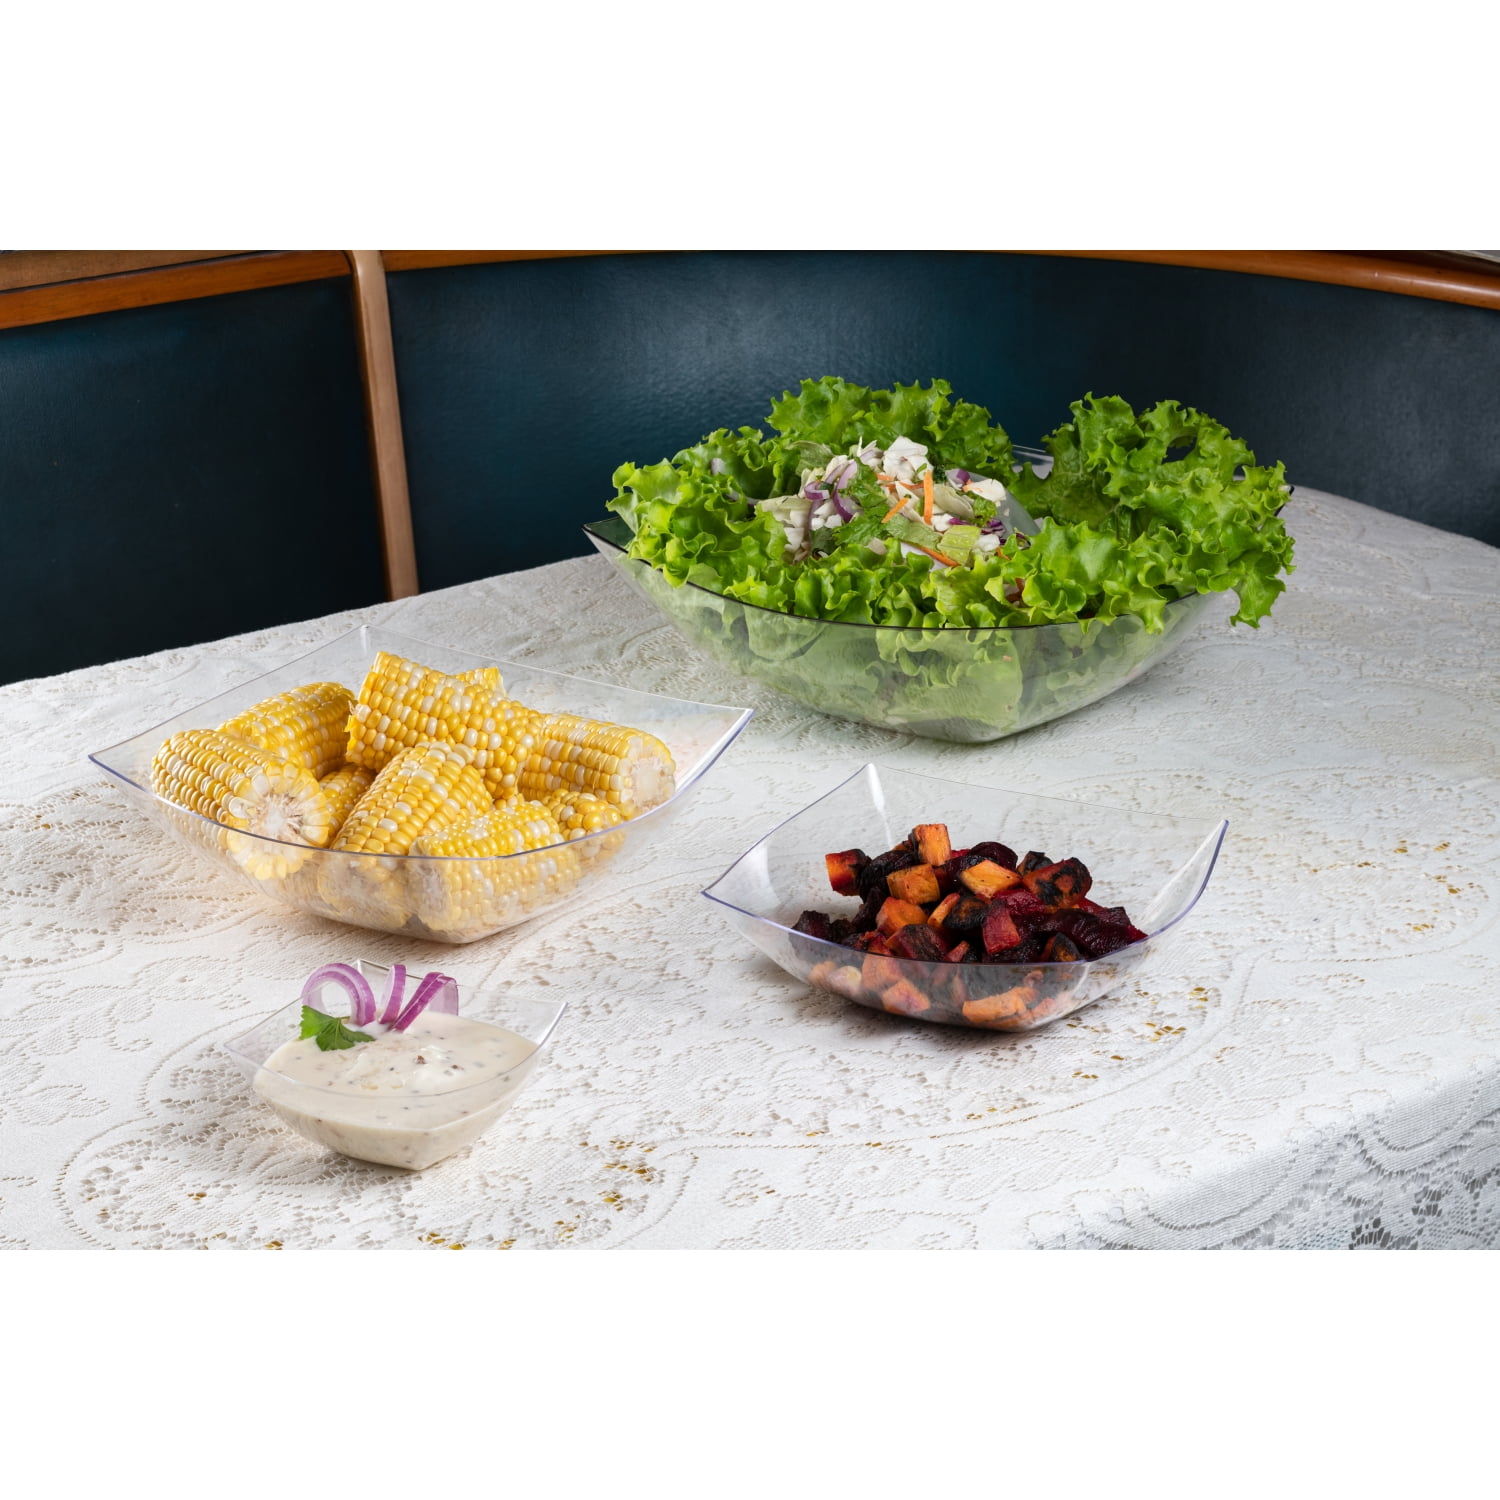 EXTRA LARGE (13-Inch) 6-Quart Plastic Salad/Mixing/Serving Bowl — Joey'z  Shopping